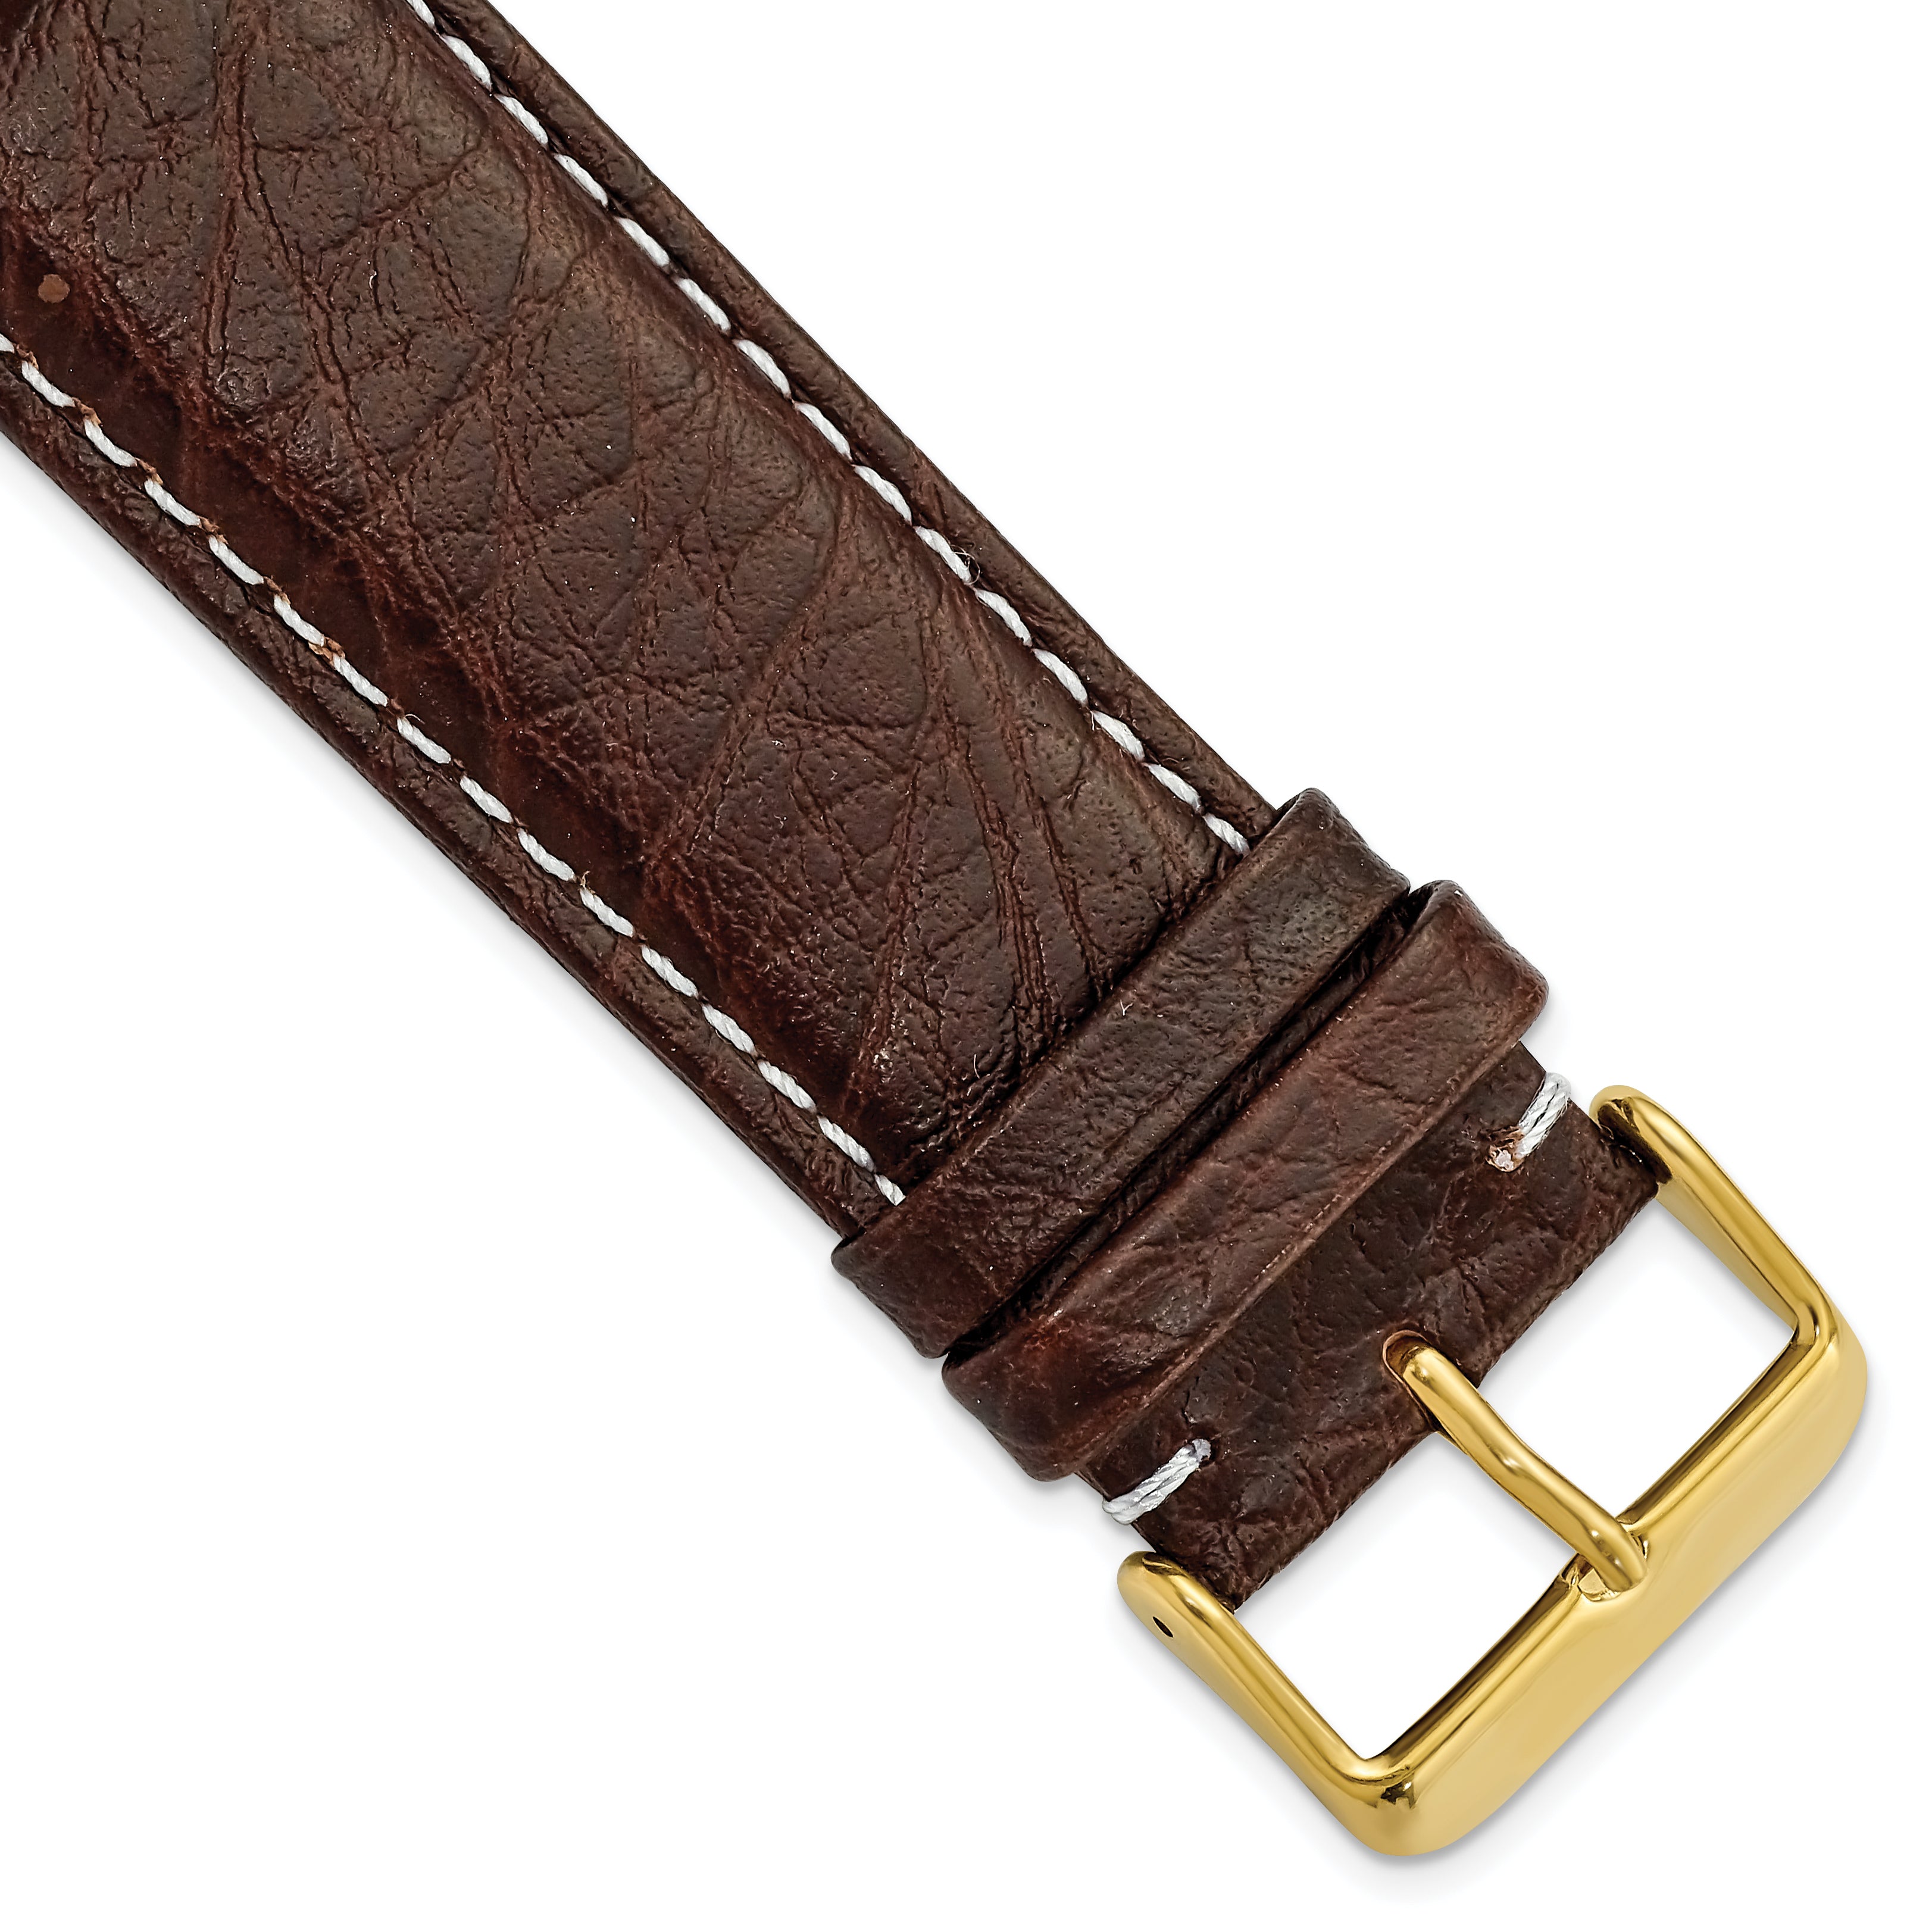 DeBeer 26mm Dark Brown Sport Leather with White Stitching and Gold-tone Buckle 7.5 inch Watch Band